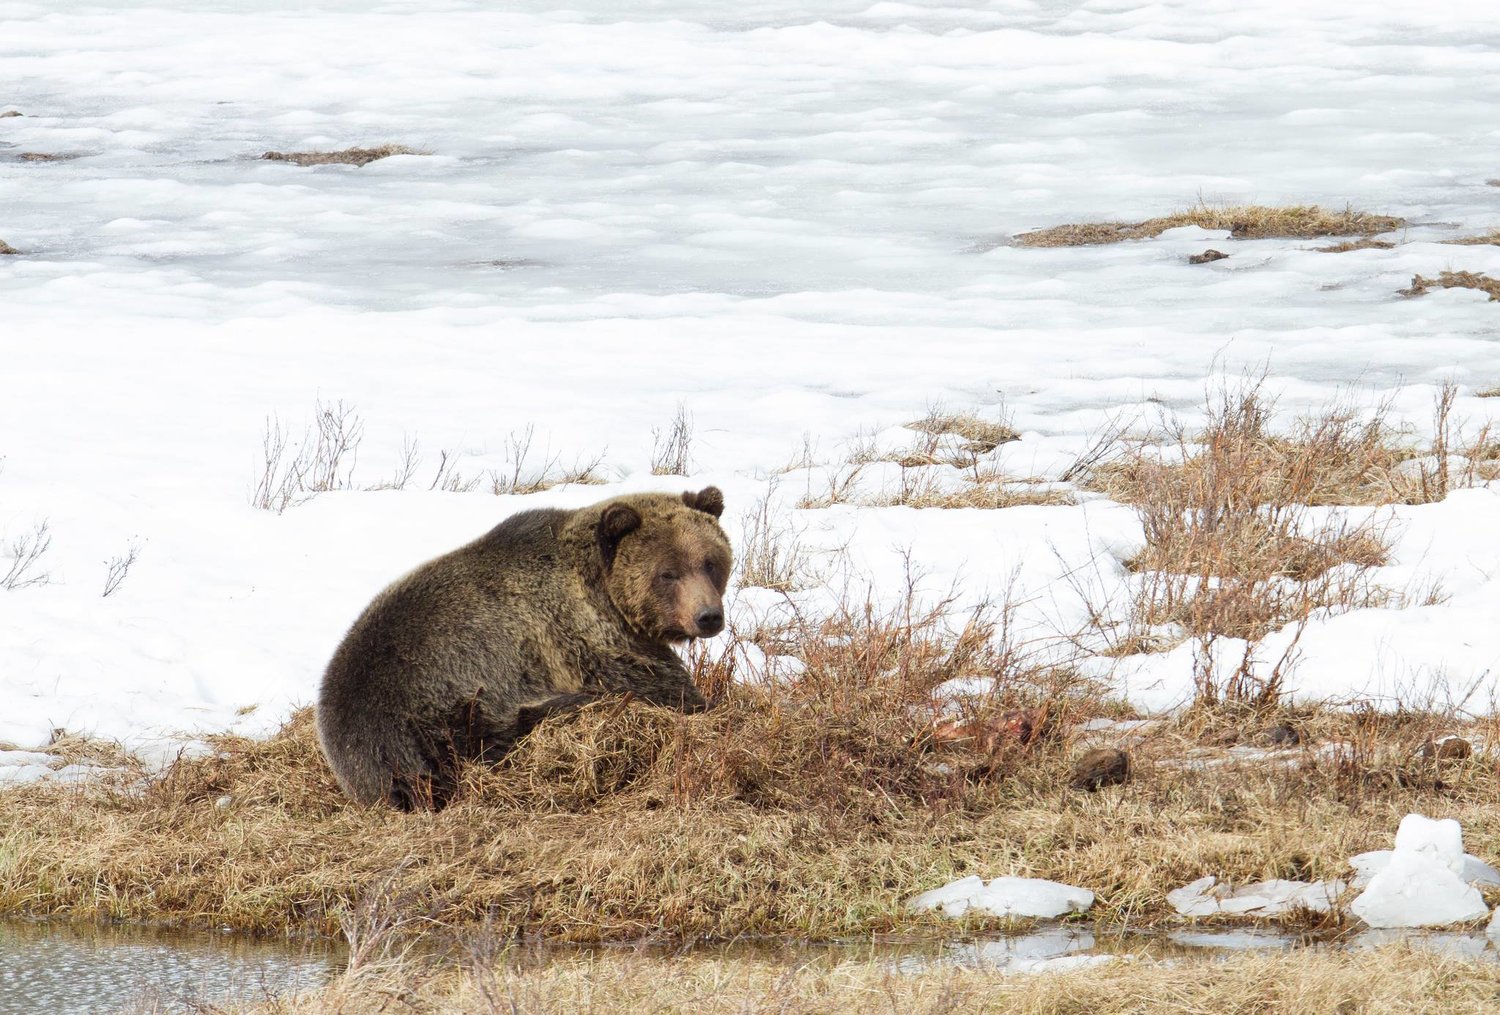 A grizzly bear browses in Yellowstone National Park earlier this month after being one of the first grizzlies spotted to have come out of hibernation. Grizzlies are roaming further south and east from the park, coming into increasing conflicts with humans and livestock.